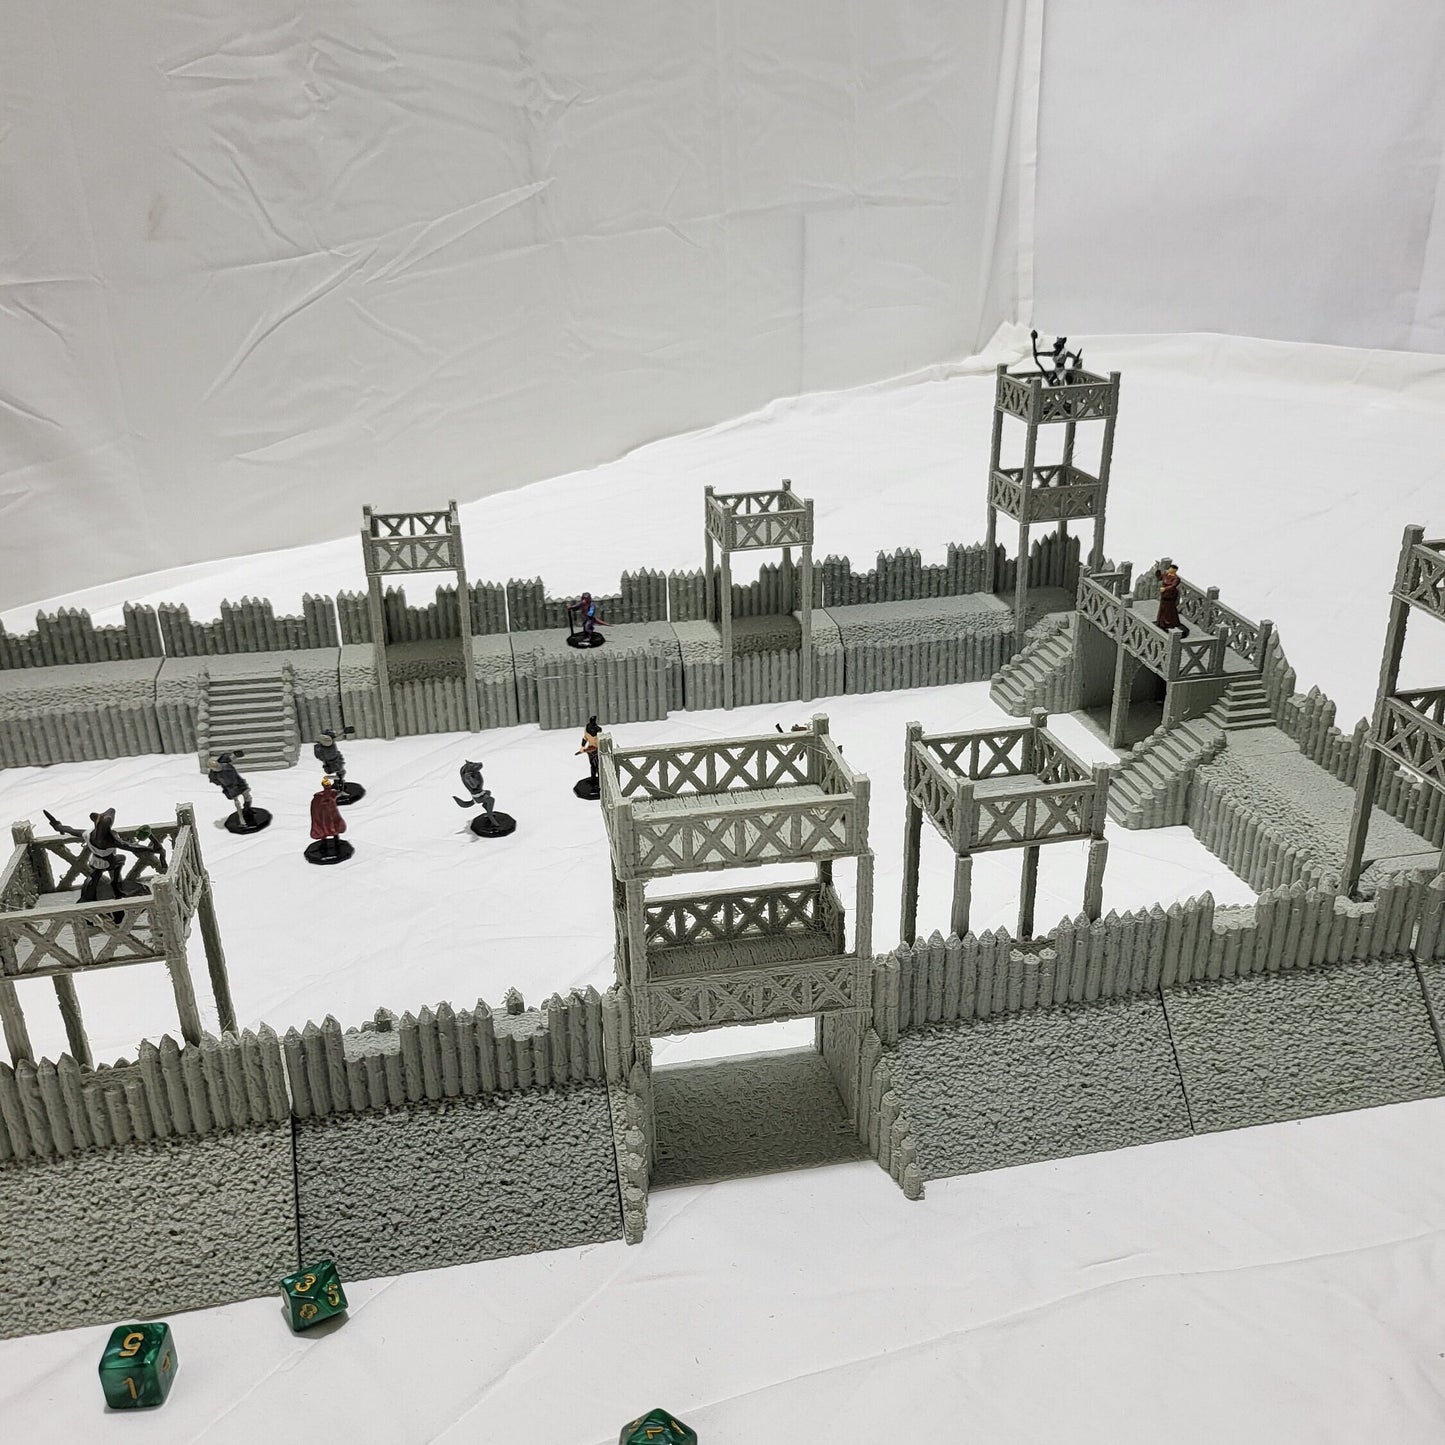 Desert Wall Kit Roman Camp Walls Towers Kit Watchtower Tower Dungeons and Dragons